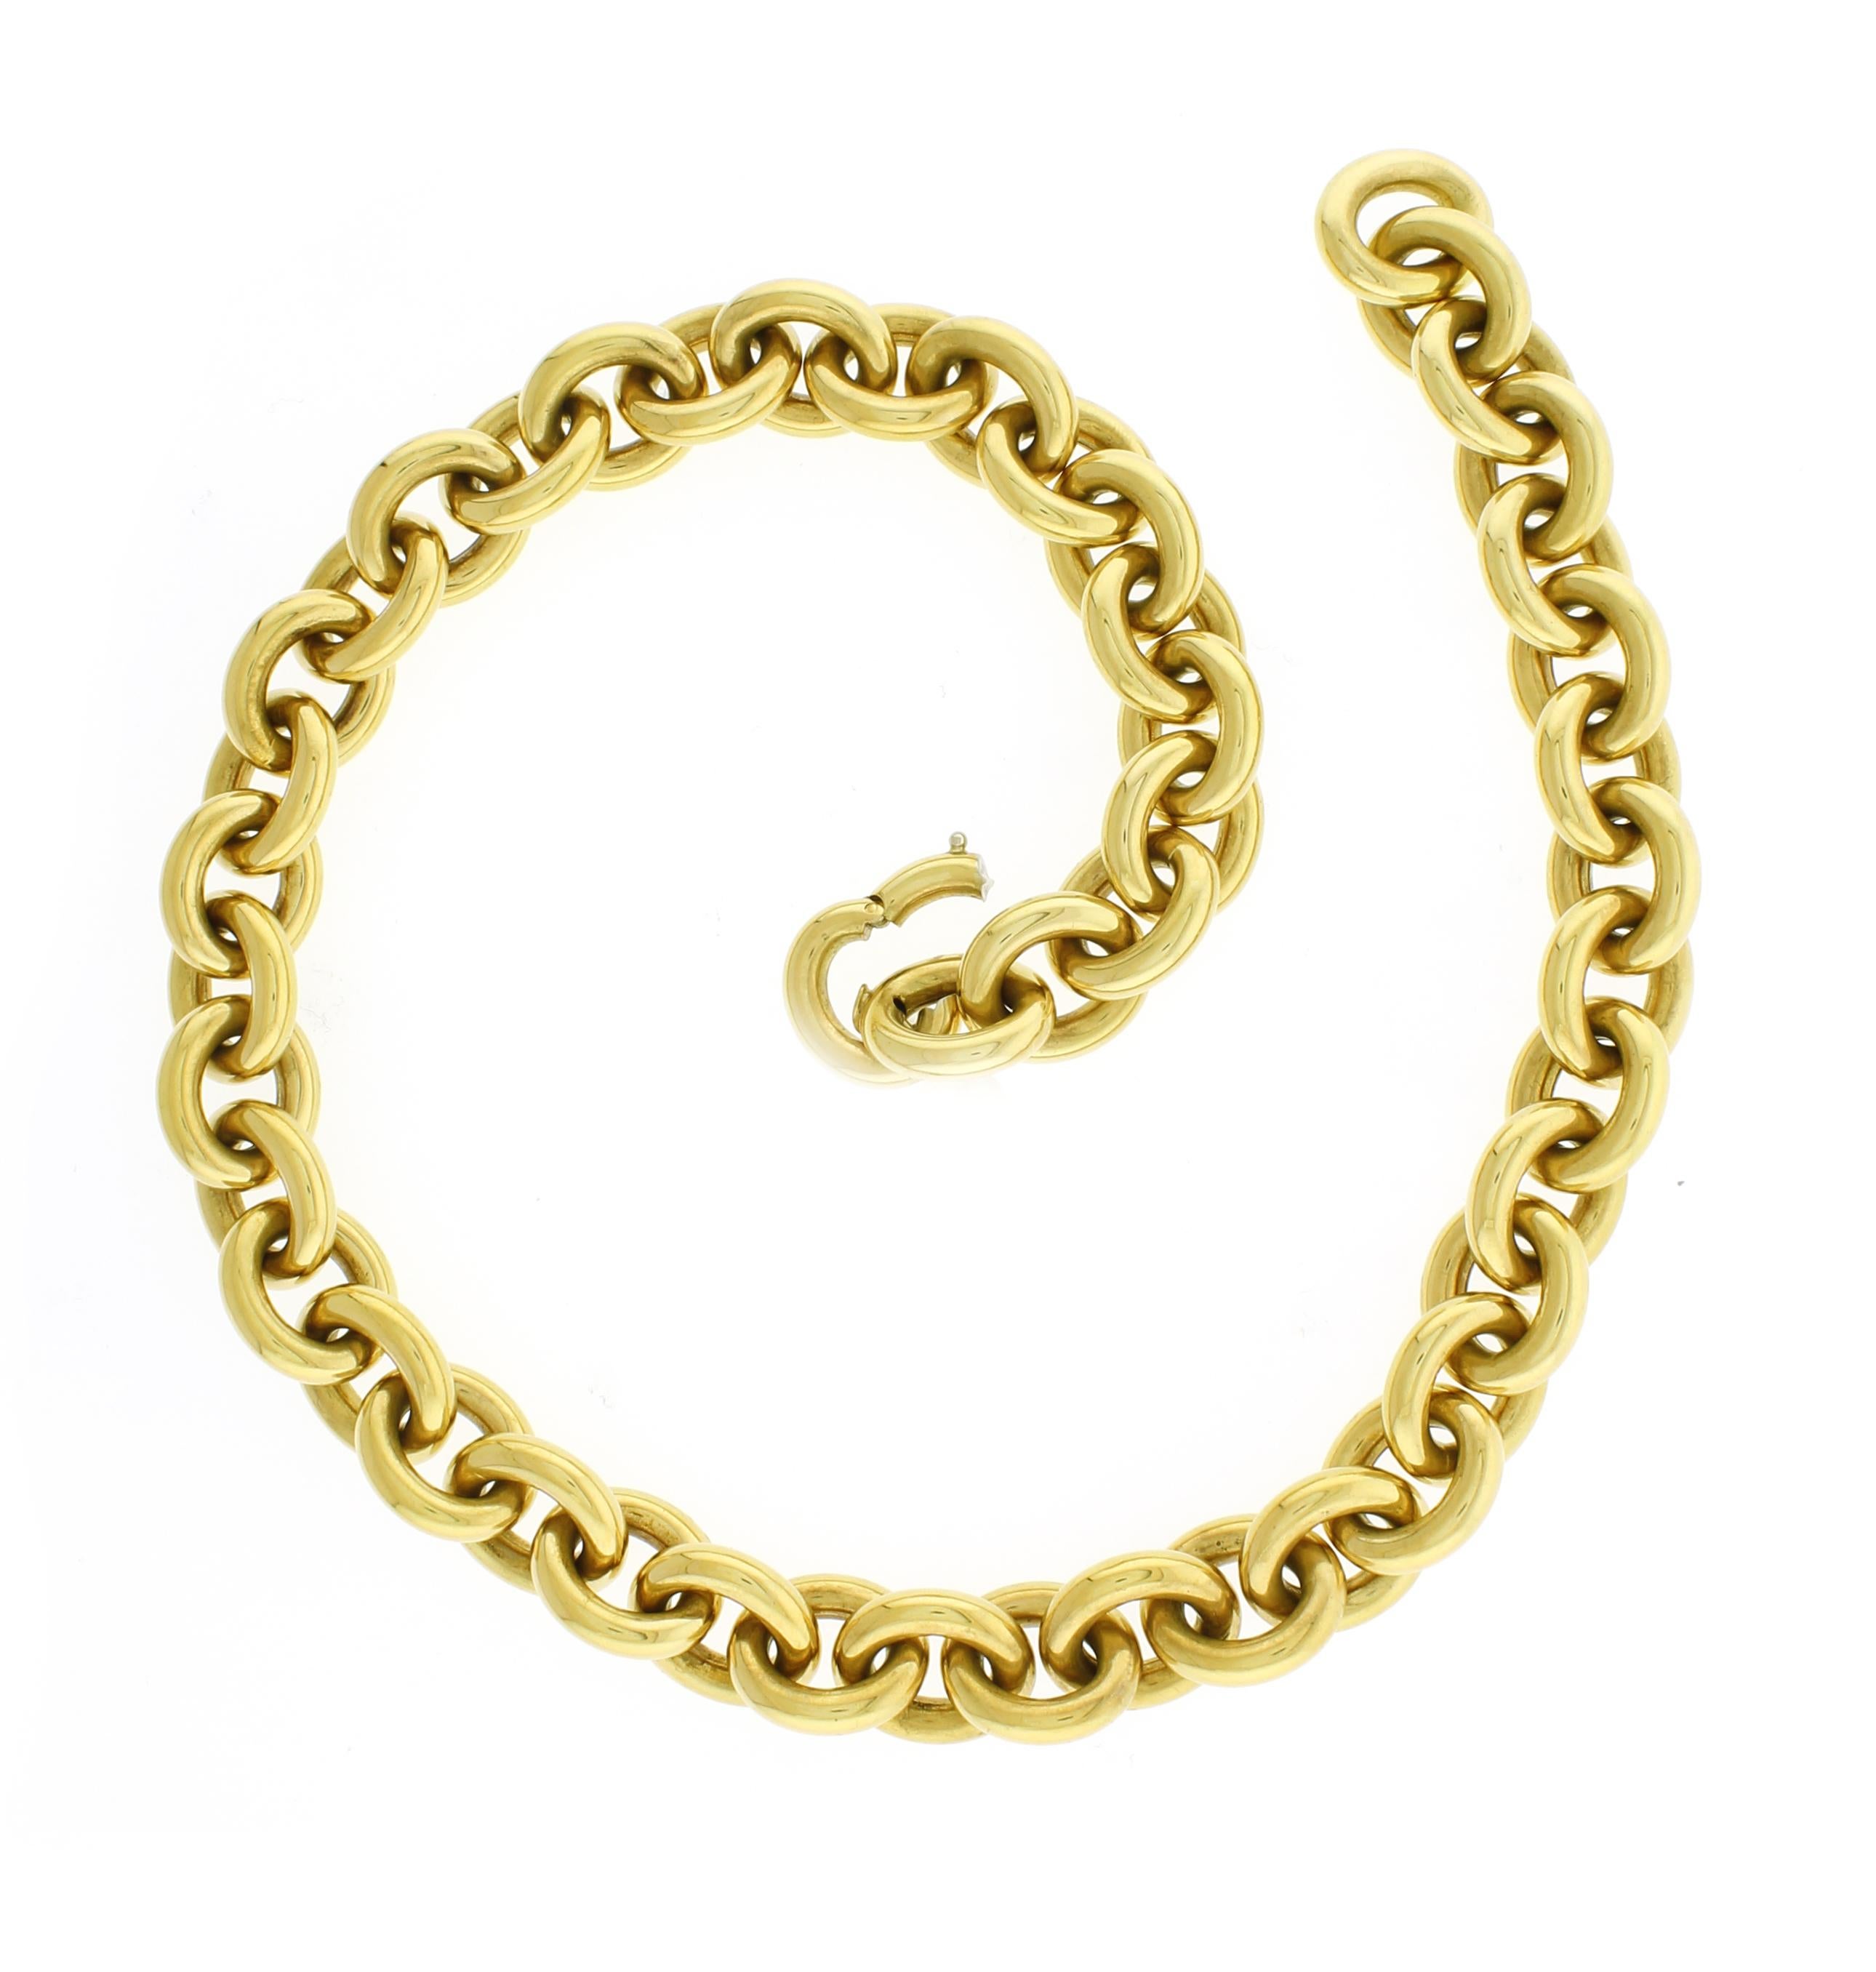 This stylish gold necklace is both lightweight and trendy.
♦ Metal: 18 Karat Yellow Gold
♦ Circa: 1980s
♦ Length: 18.5 inches
♦ Width: 9/16th of an inch
♦ Weight: 83.7grams
♦ Packaging: Pampillonia Presentation Box
♦ Condition: Excellent , pre-owned